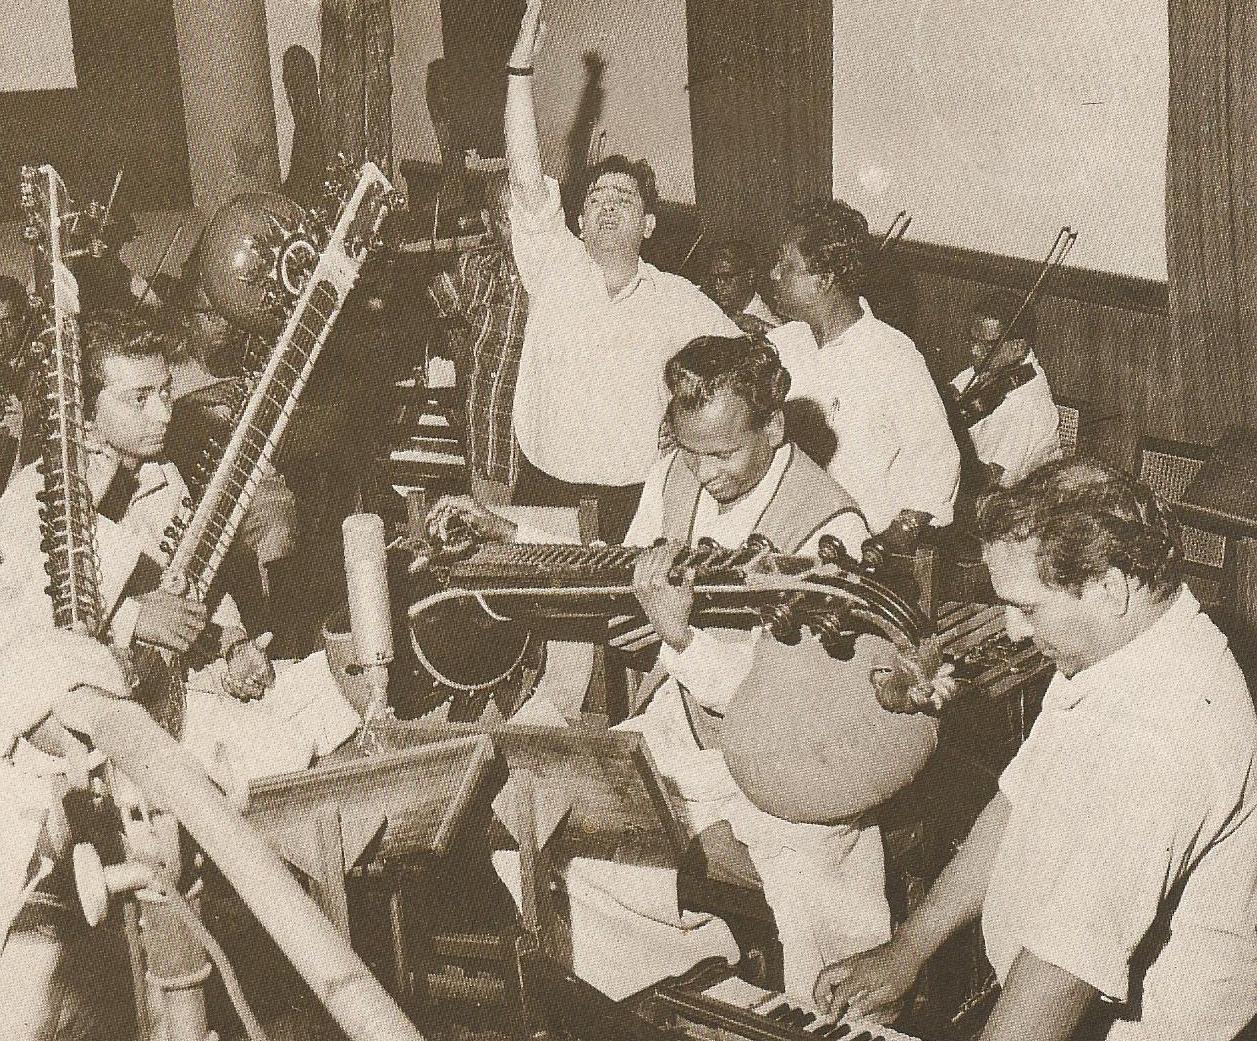 Shankar with Raj Kapoor & musicians recording a song in the recording studio